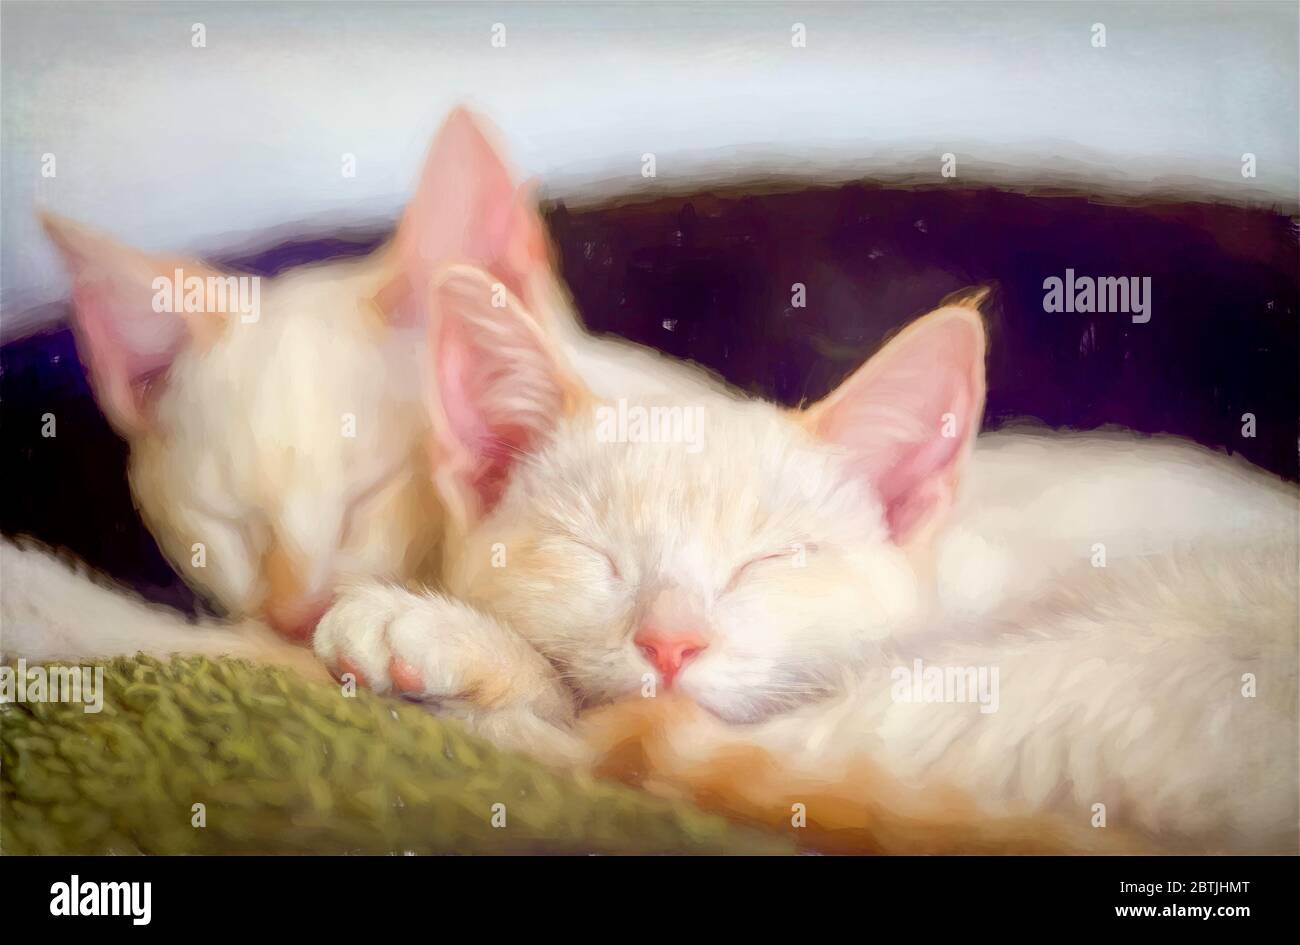 Two Pretty White Fluffy Kittens are Sleeping Together Stock Photo